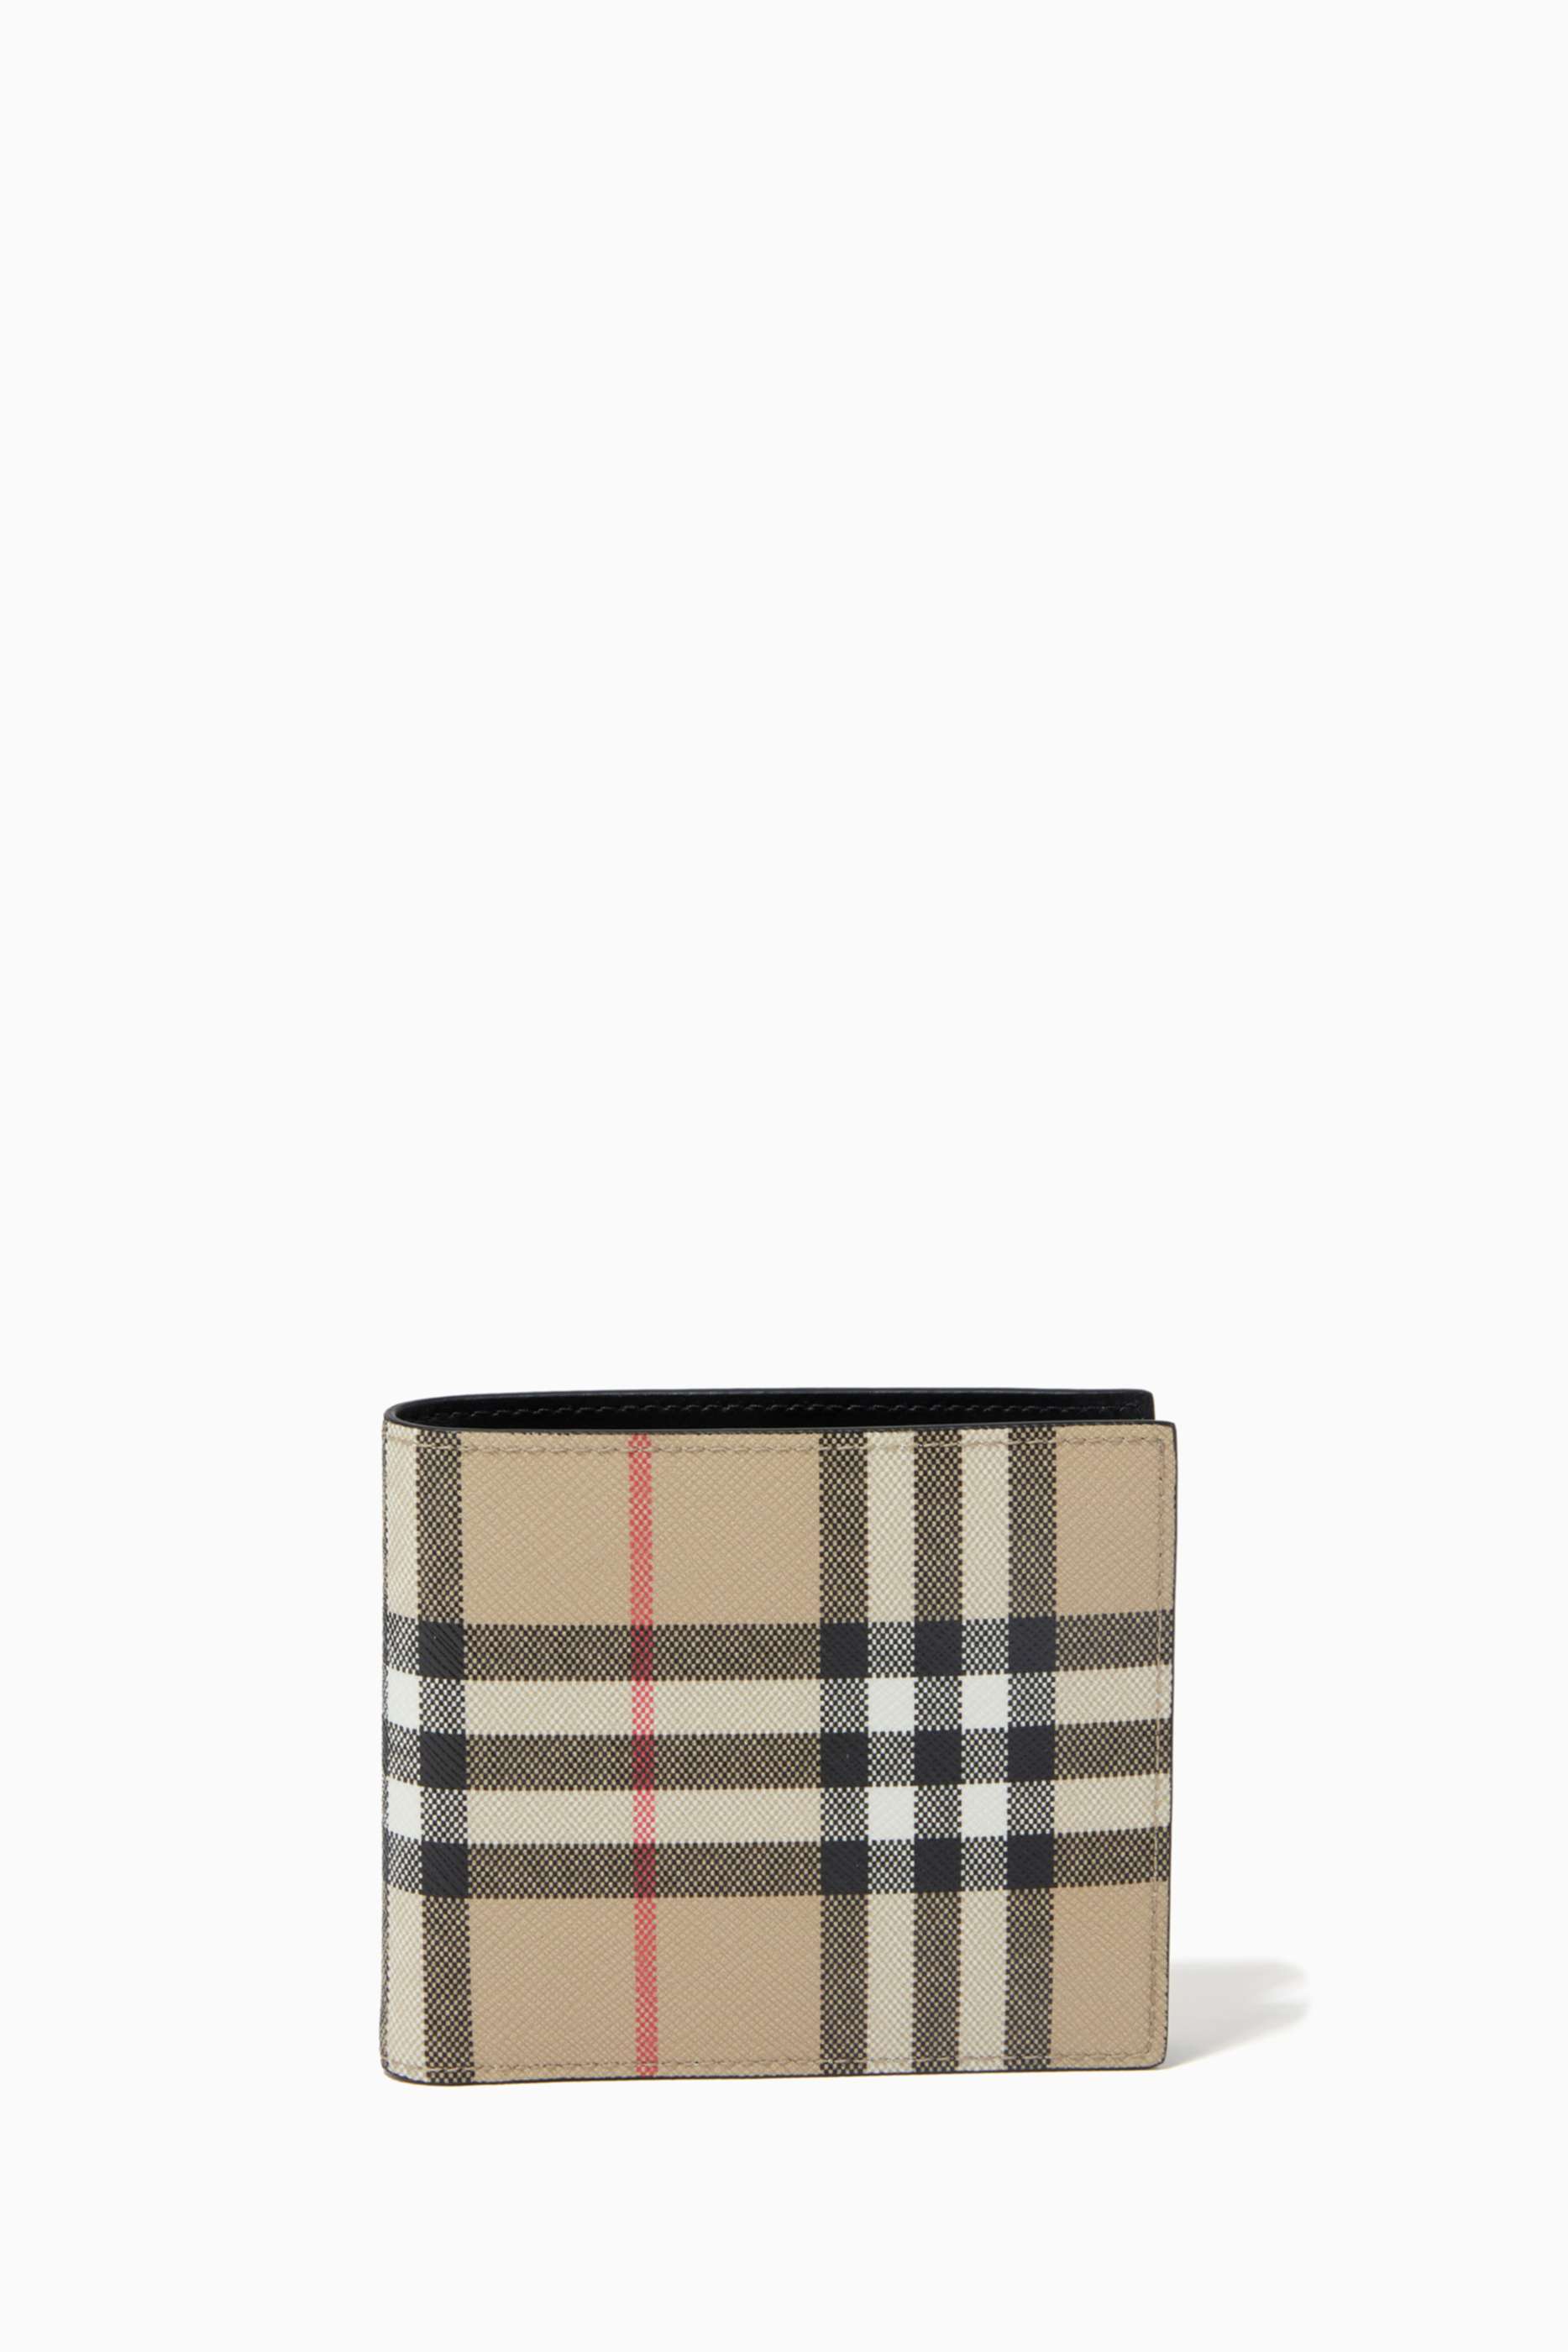 Shop Burberry Neutral Bifold Wallet in Vintage Check E-Canvas for 